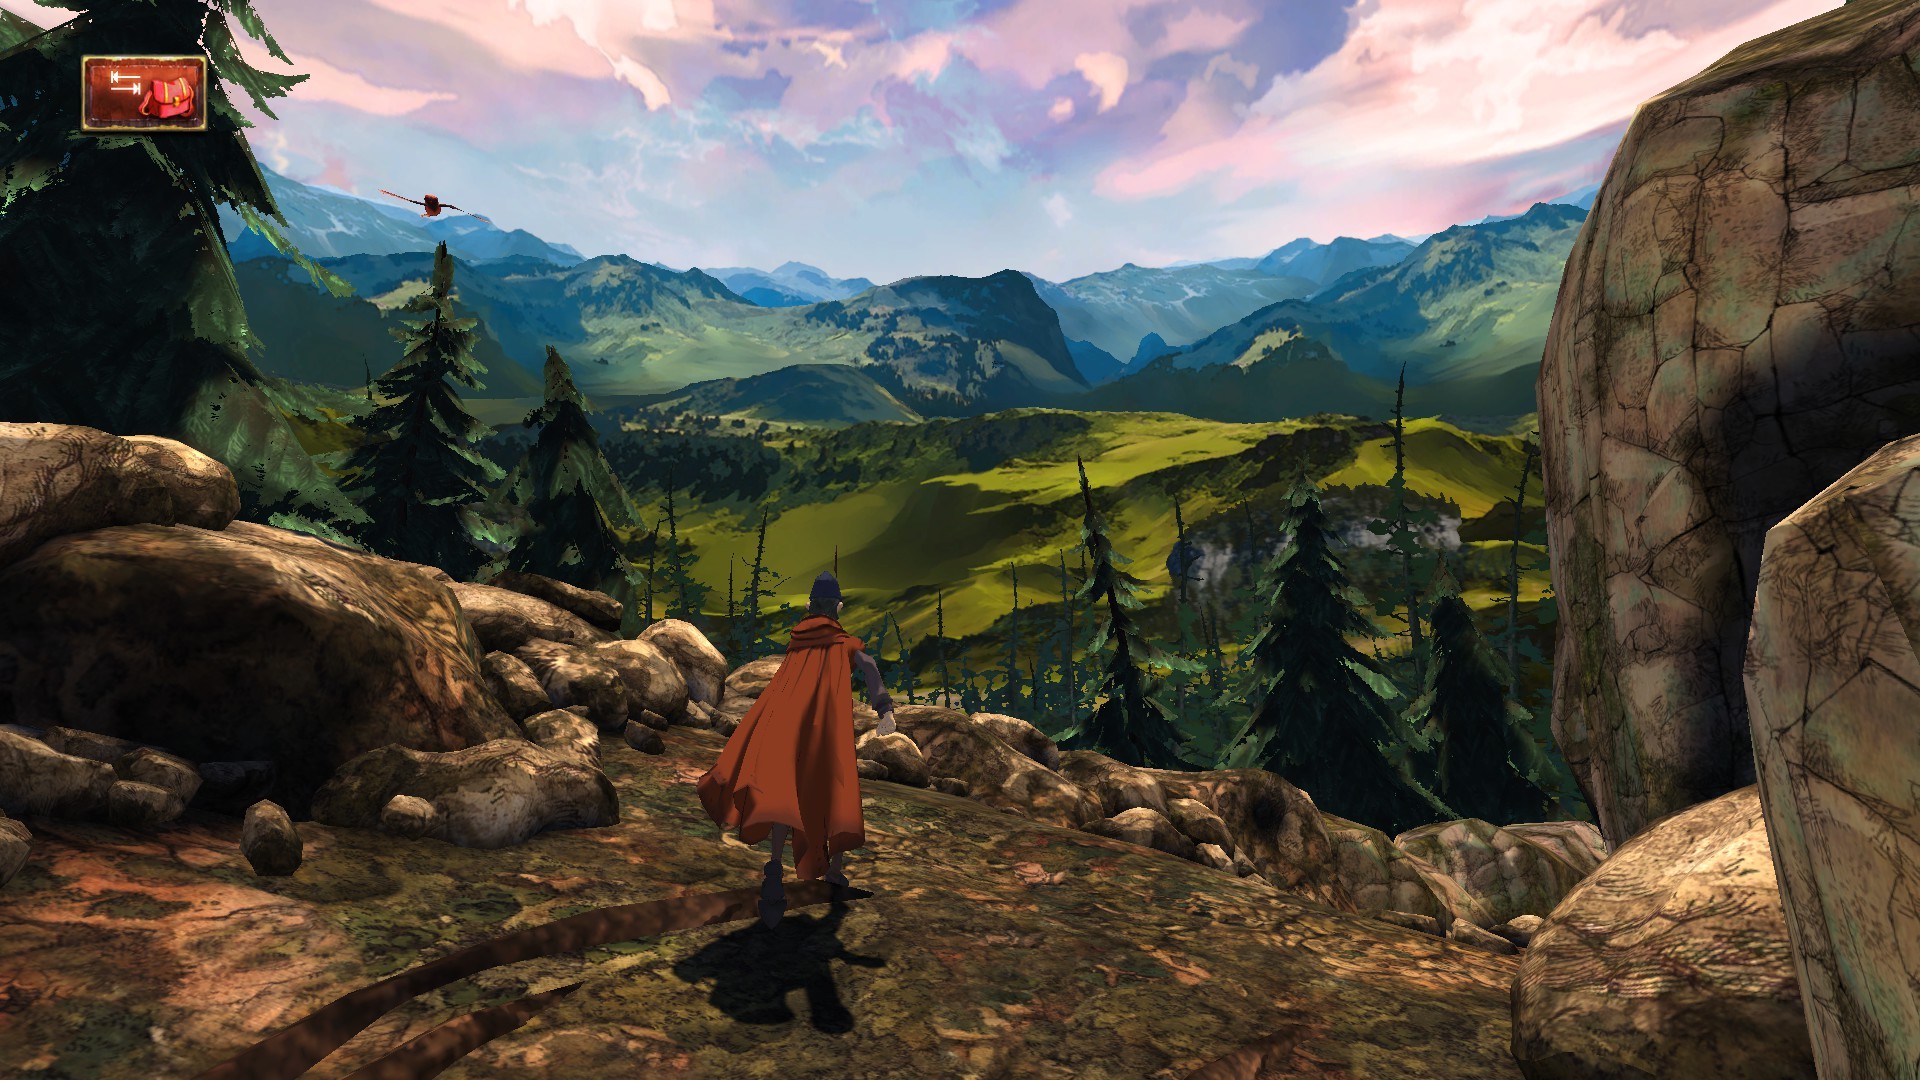 1920x1080 > King's Quest Wallpapers